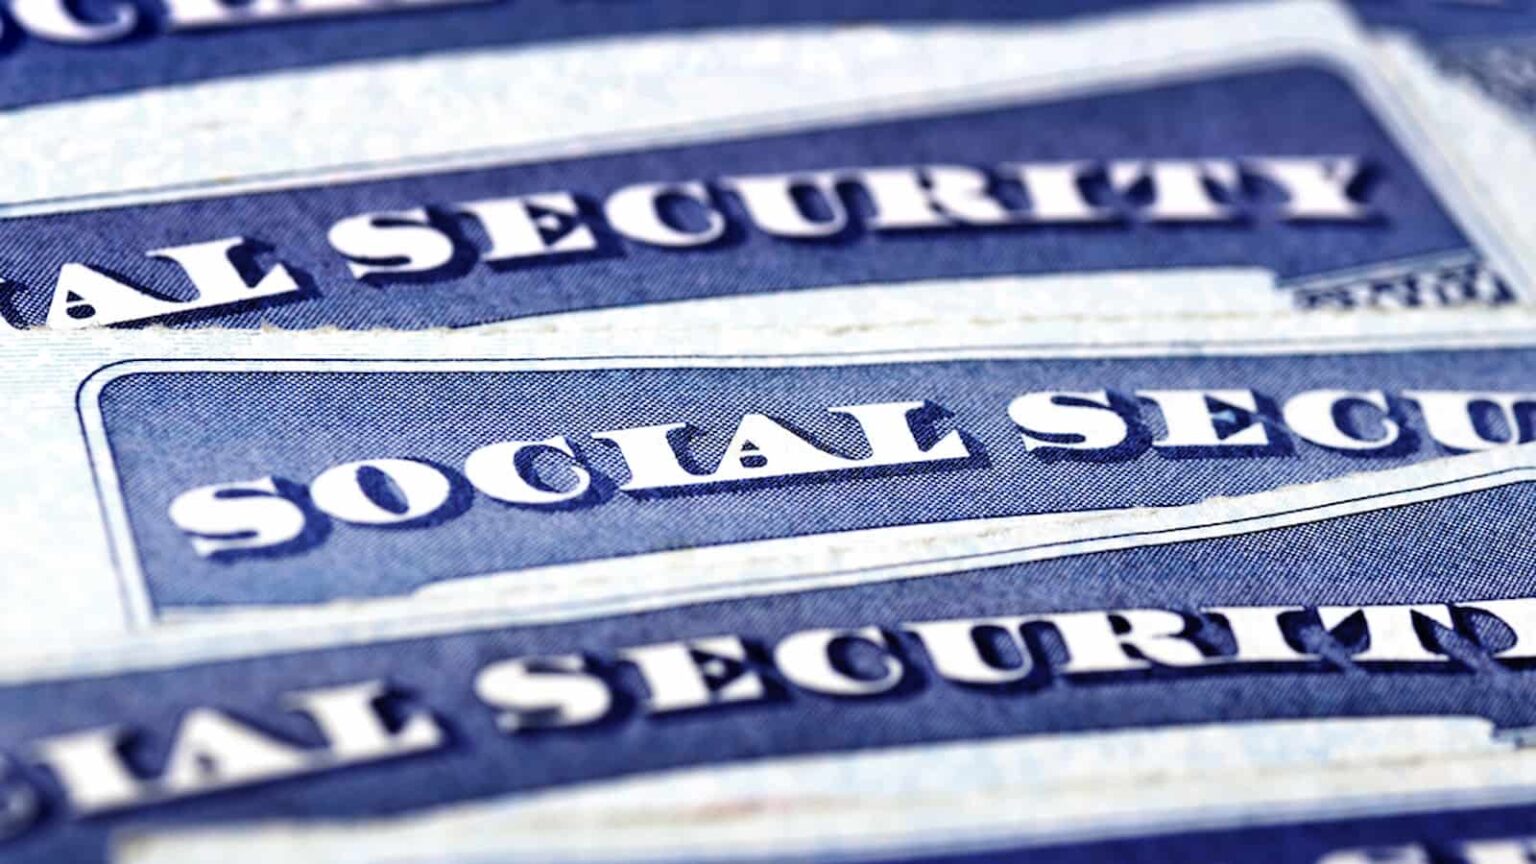 March Social Security Payments Who will receive the payment this week